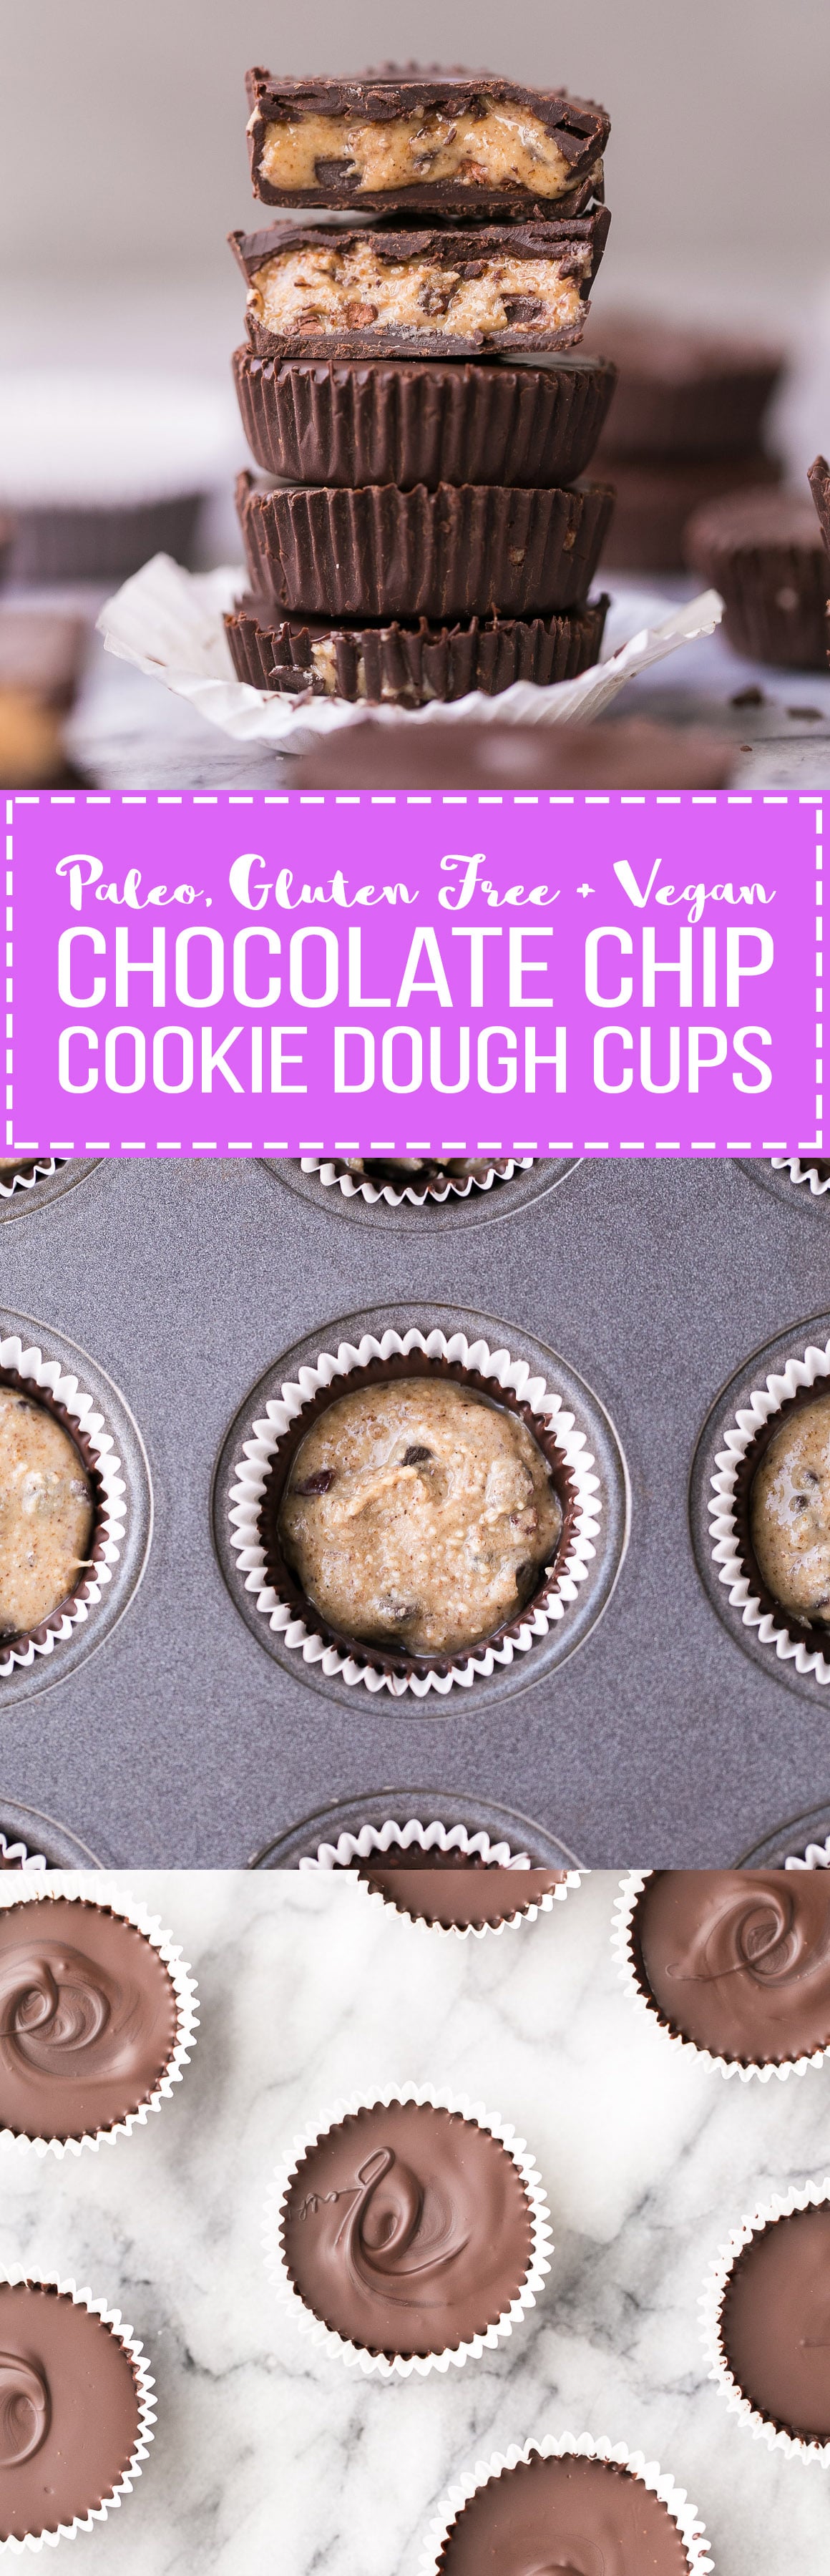 These Chocolate Chip Cookie Dough Cups are an easy way to satisfy your cookie dough craving in a healthy + delicious way! These easy, no-bake cups are gluten-free, Paleo, and vegan.